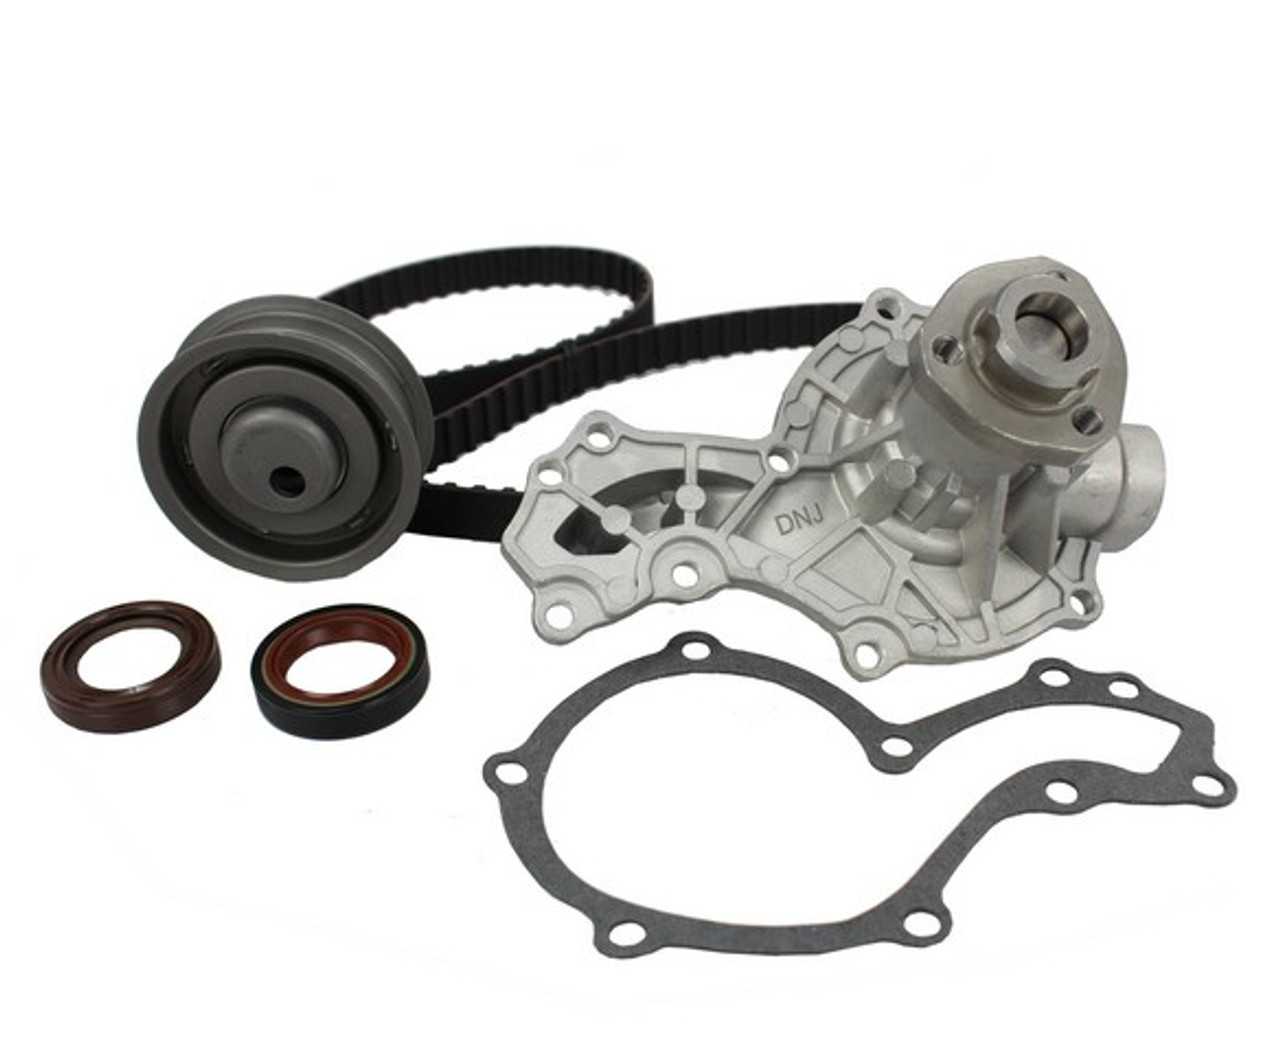 Timing Belt Kit with Water Pump 2.0L 1996 Volkswagen Cabrio - TBK803WP.2